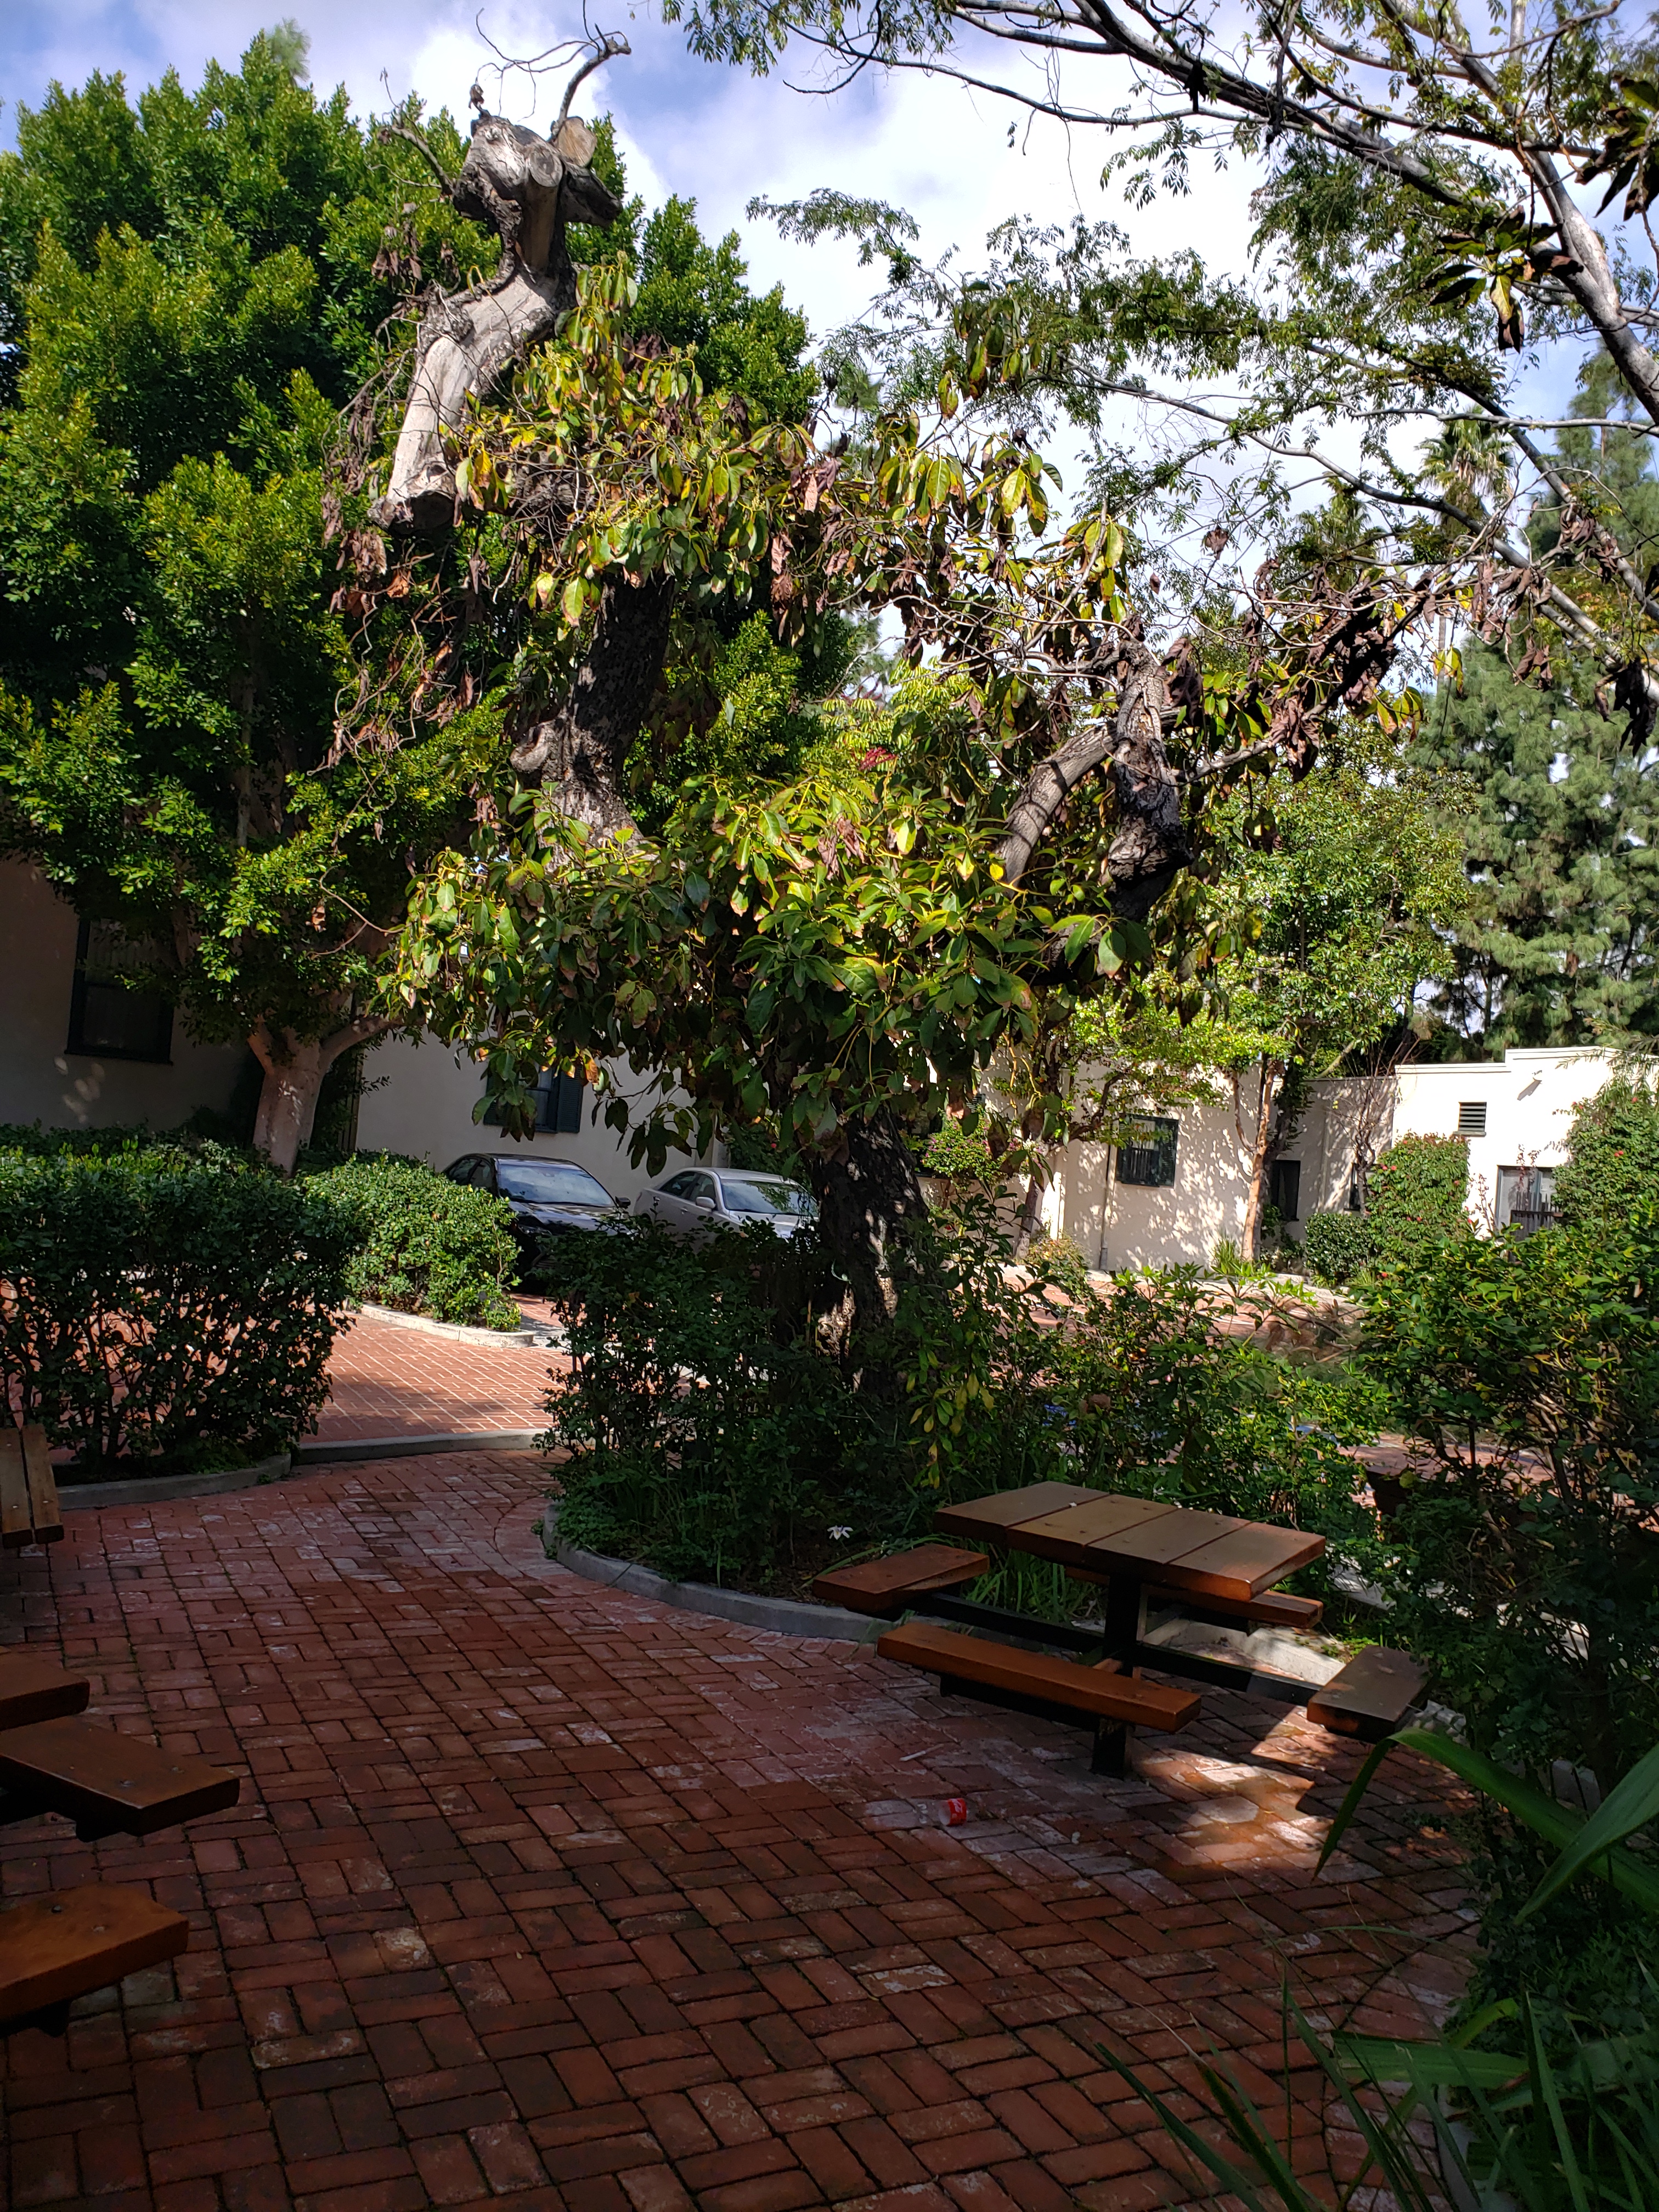 Exterior view of Hollywood El Centro Apartments courtyard. Brick tiled with wooden picknic tables and landscaping surrounding.